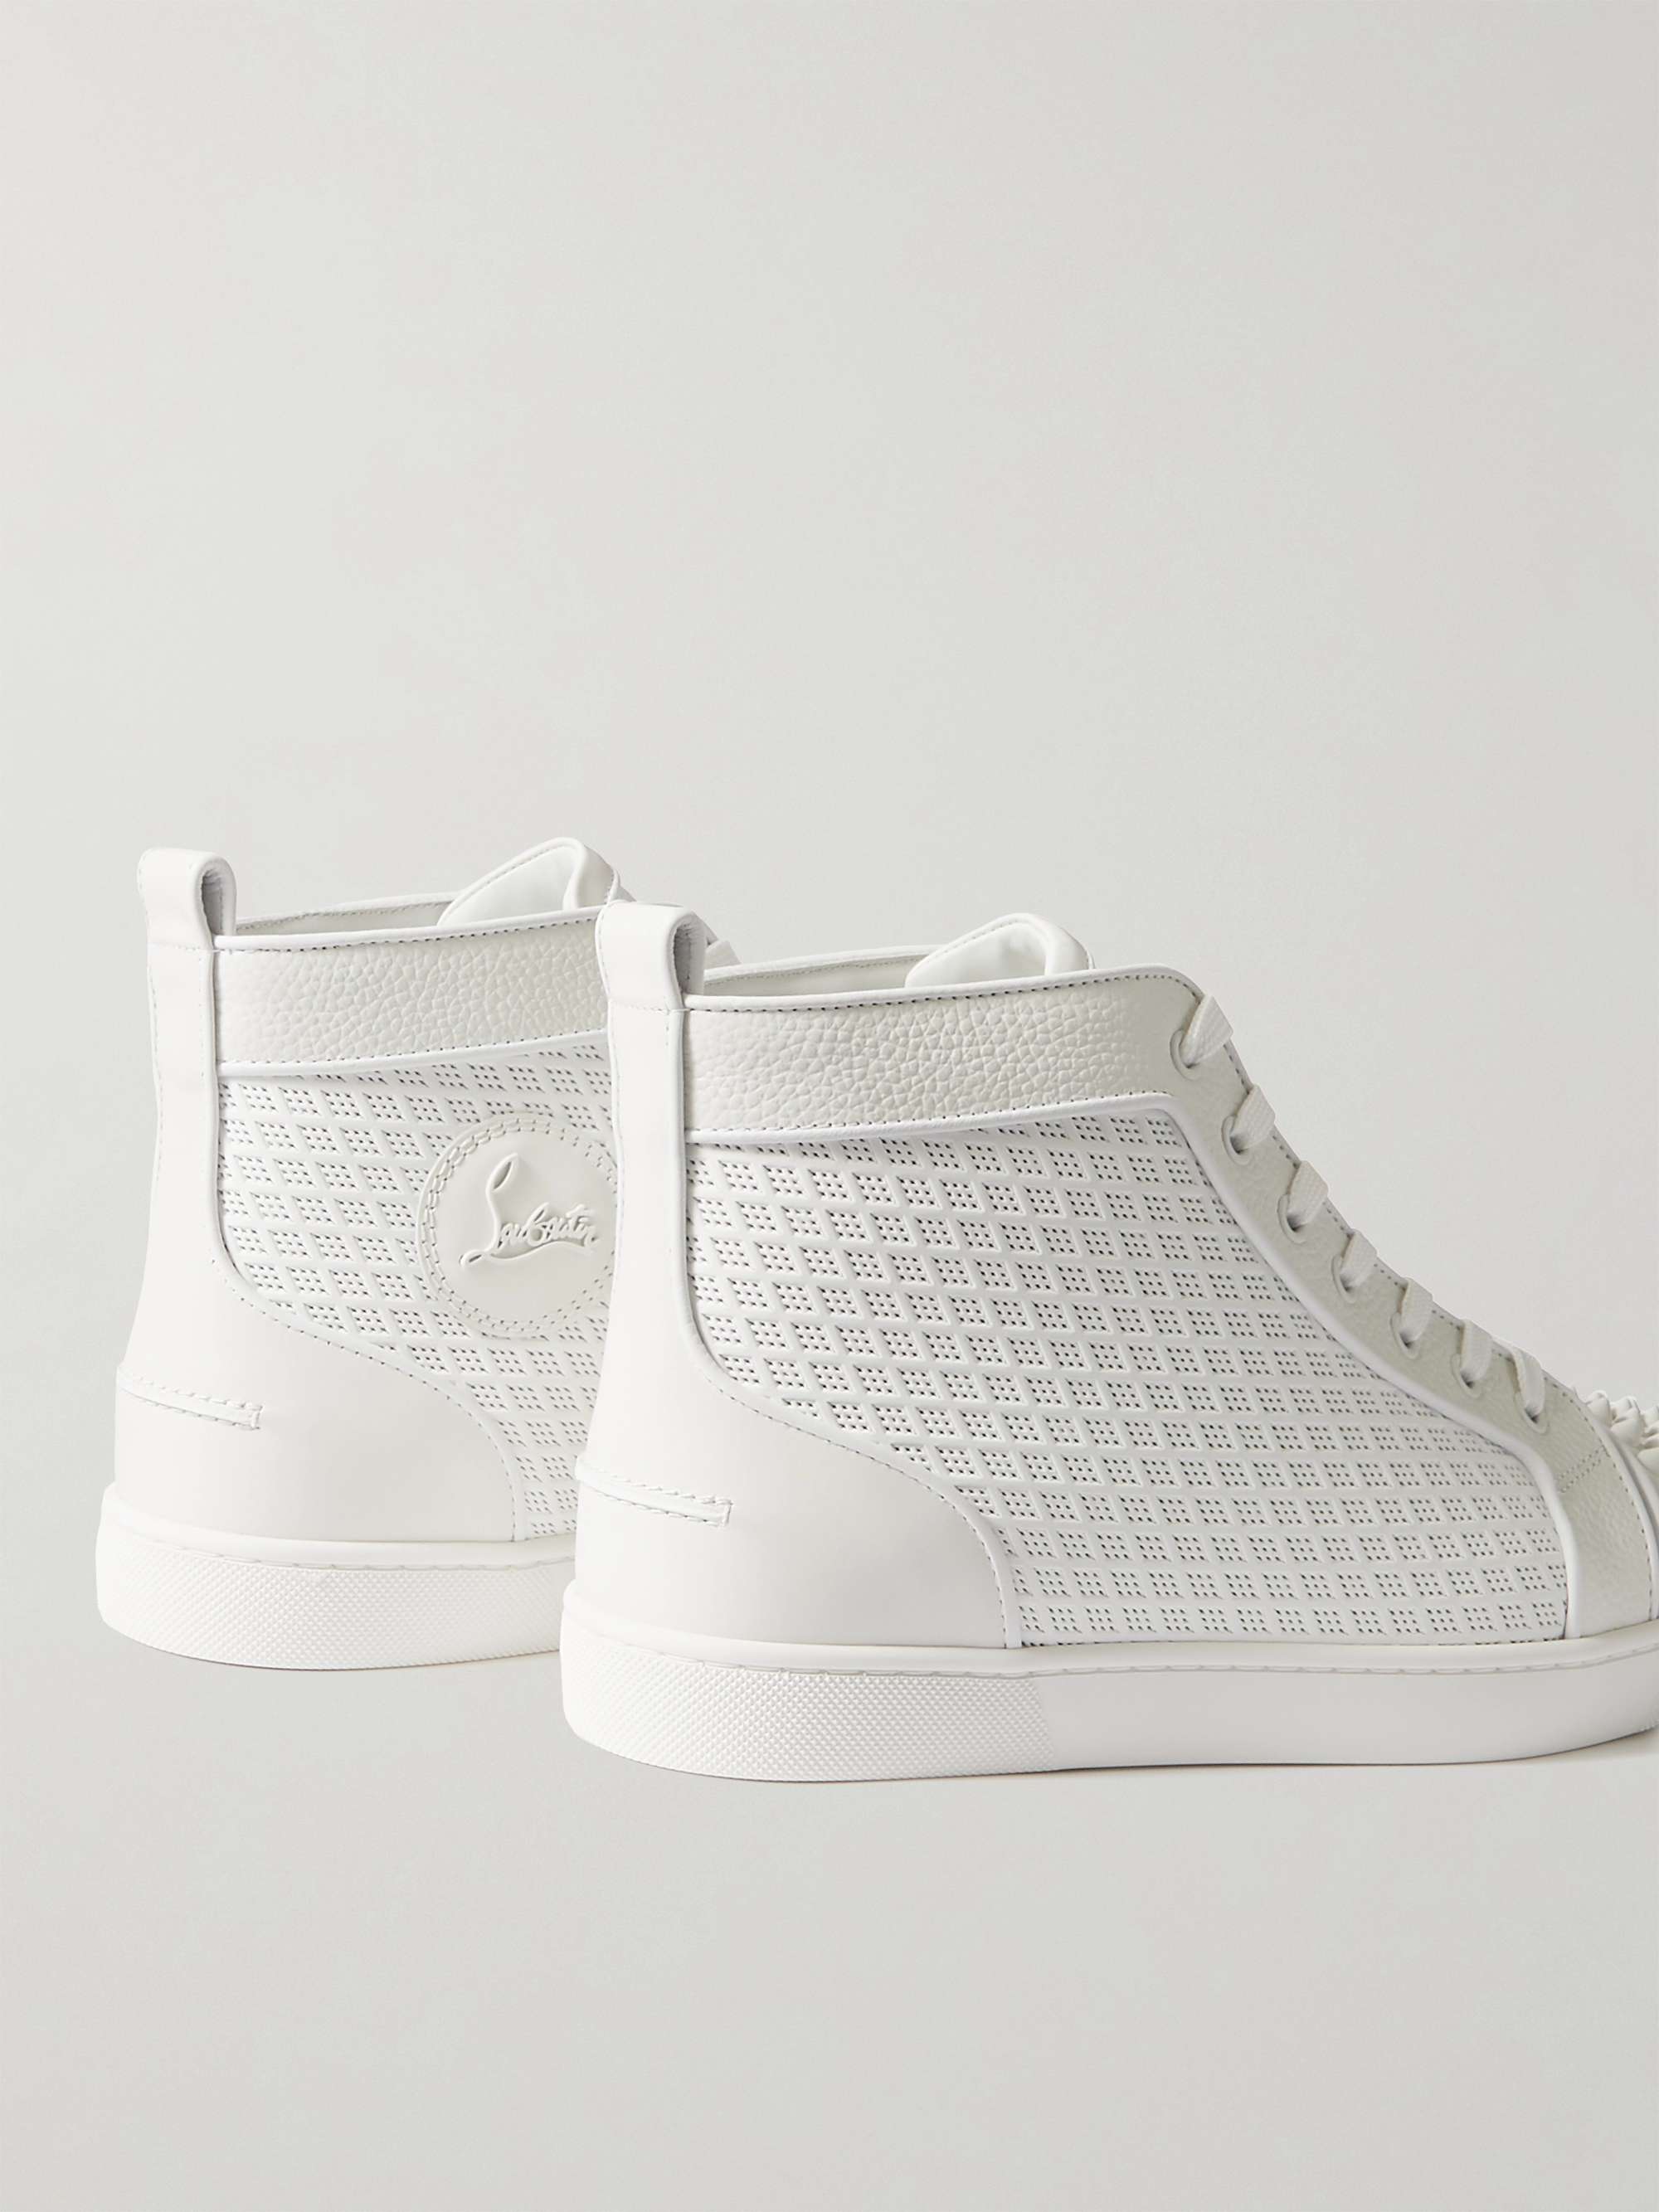 fjendtlighed svag fest CHRISTIAN LOUBOUTIN Lou Spikes Orlato Studded Leather and Mesh High-Top  Sneakers | MR PORTER